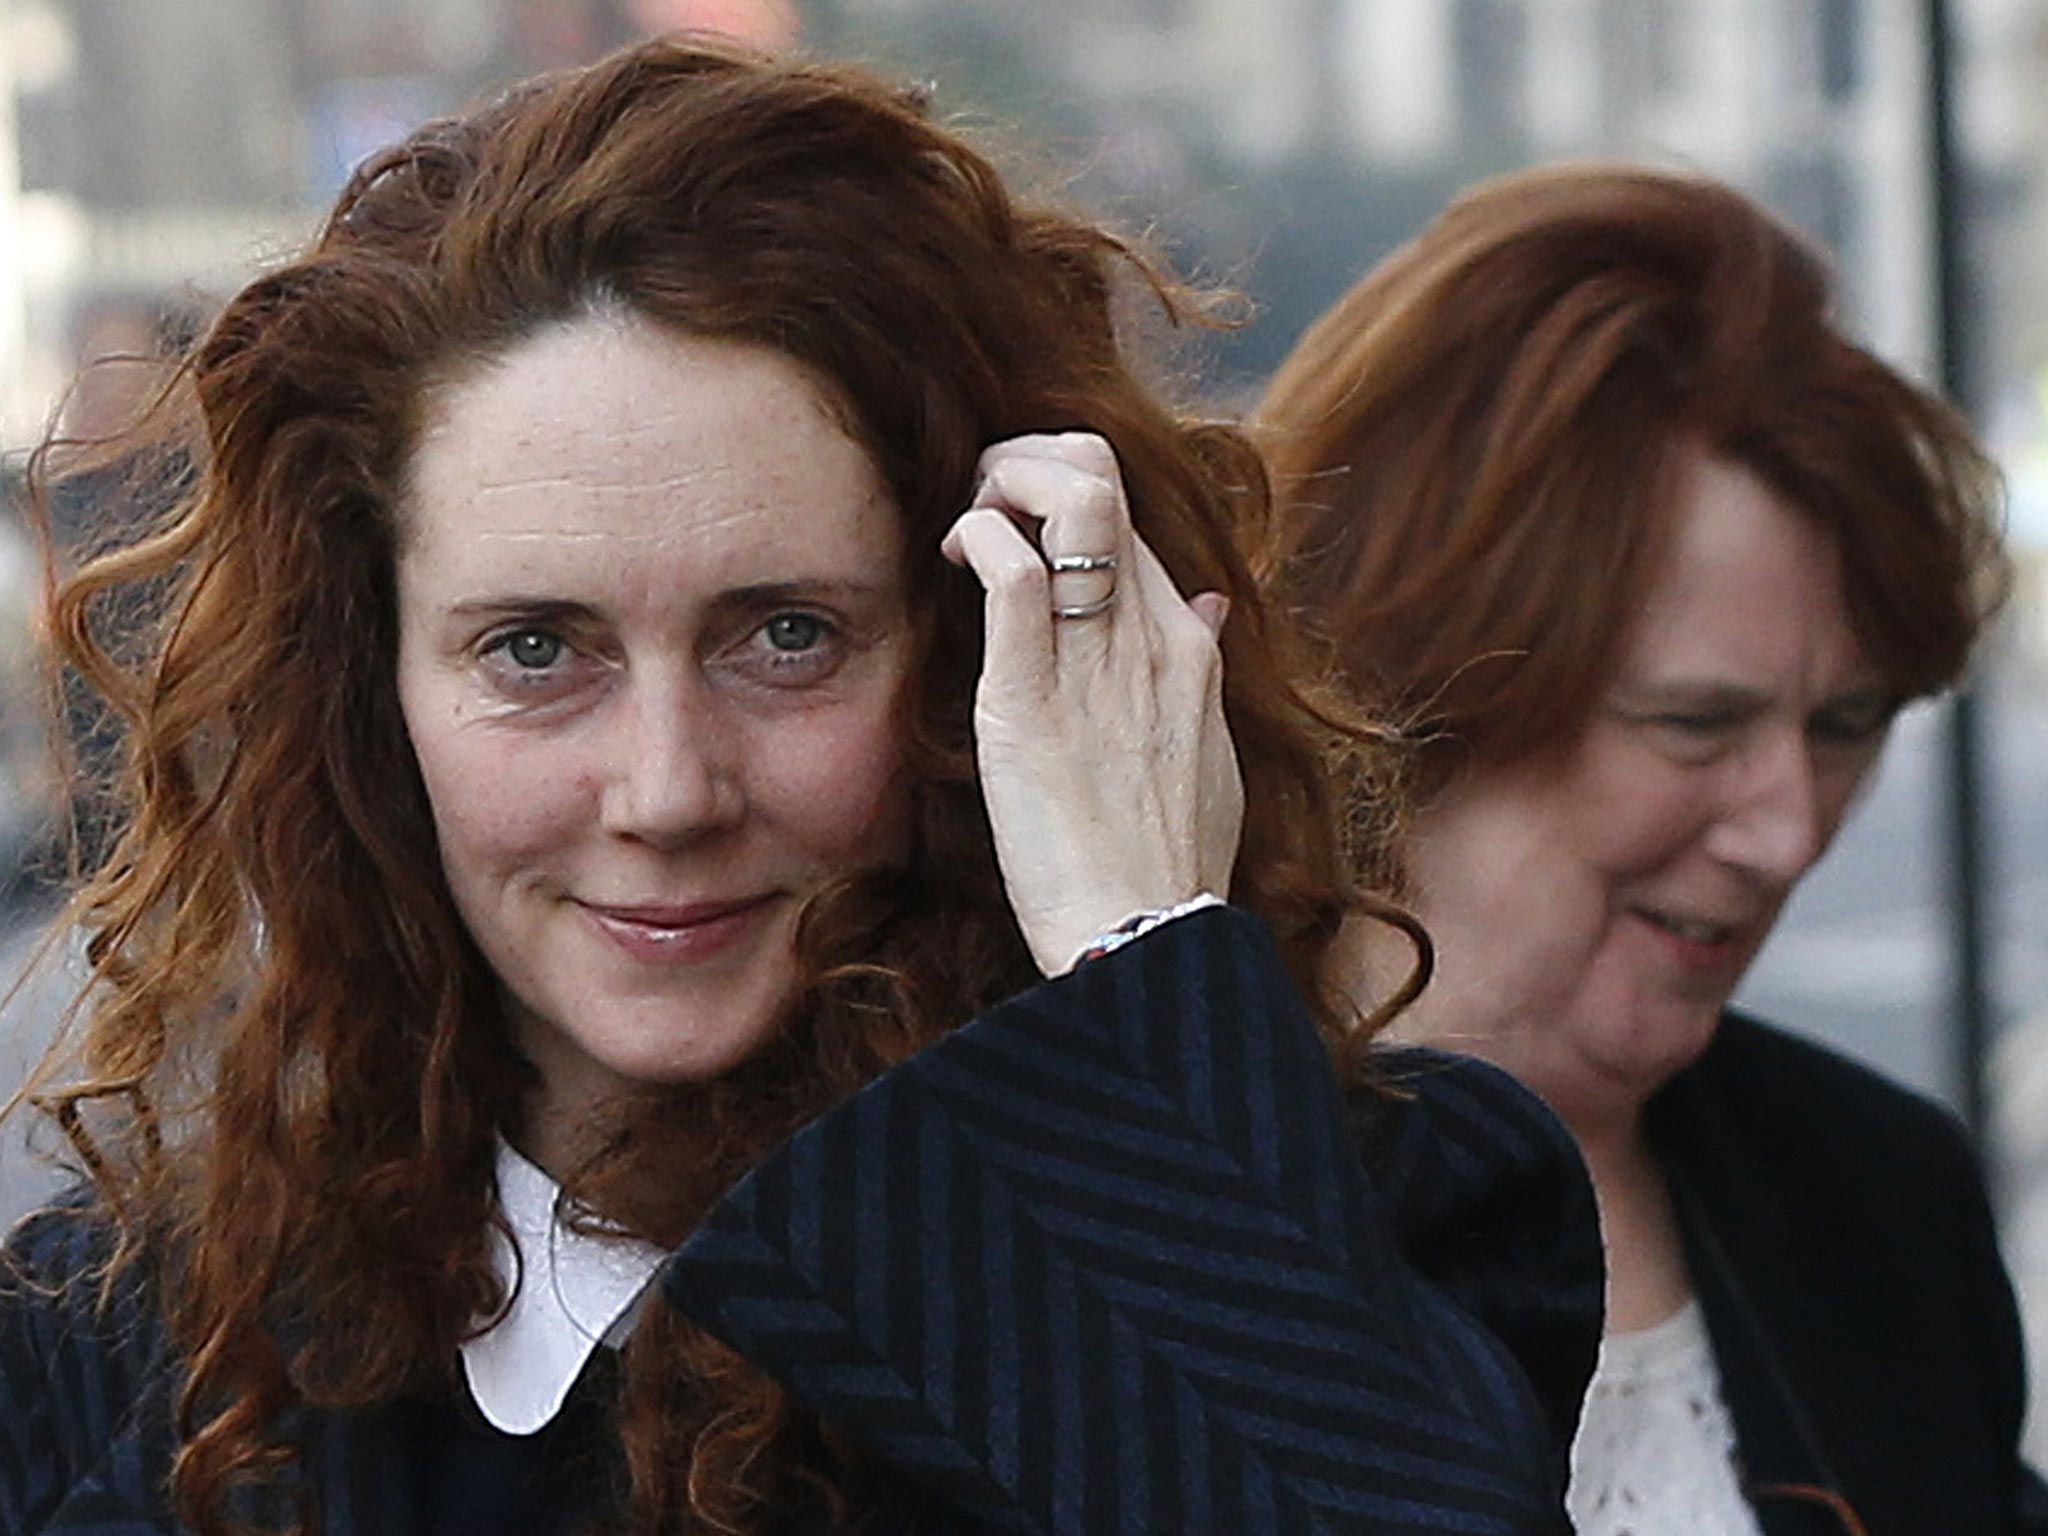 Former News International chief executive Rebekah Brooks arrives at the Old Bailey courthouse with her mother Deborah Wade